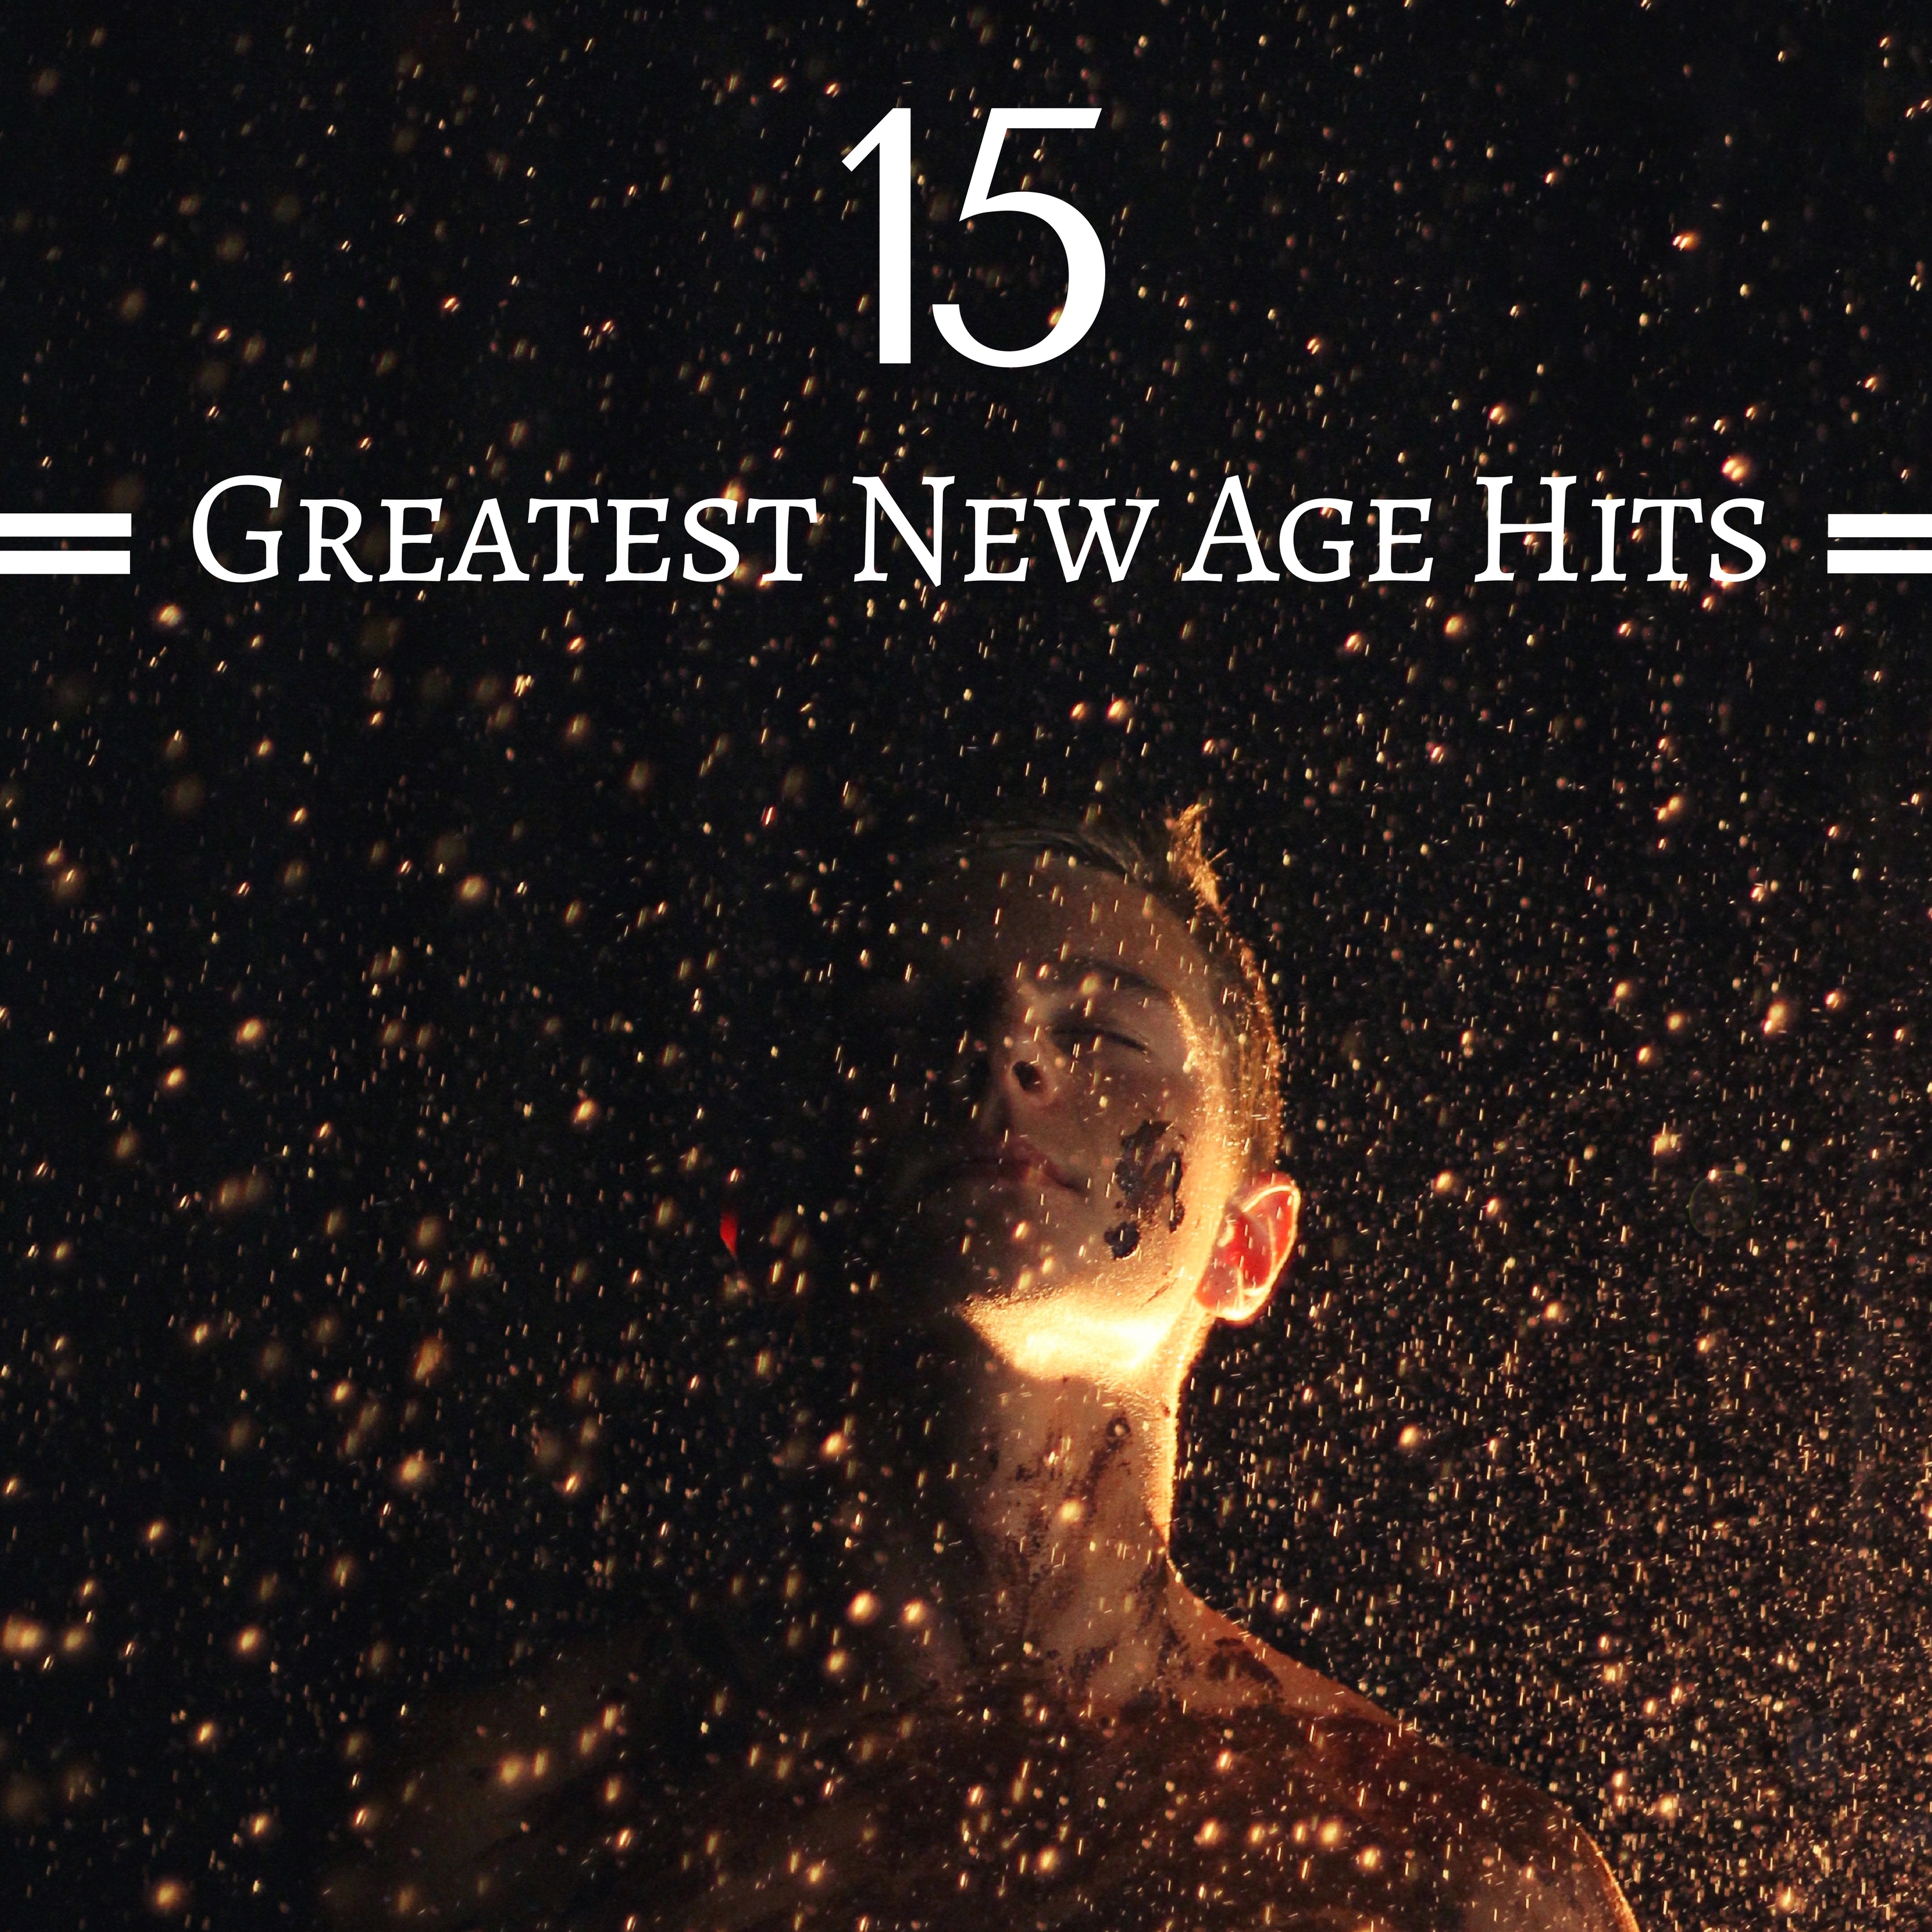 15 Greatest New Age Hits - The Best Relaxing Music with Nature Sounds